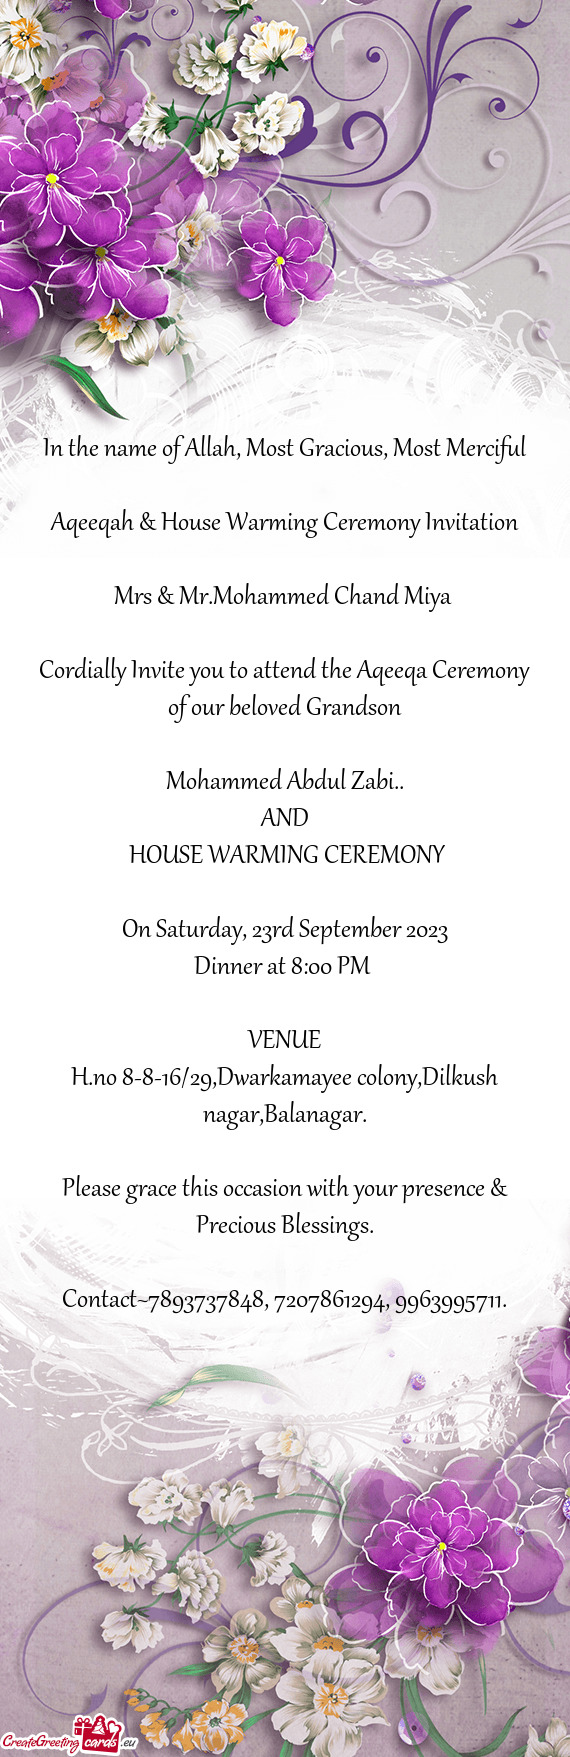 Cordially Invite you to attend the Aqeeqa Ceremony of our beloved Grandson